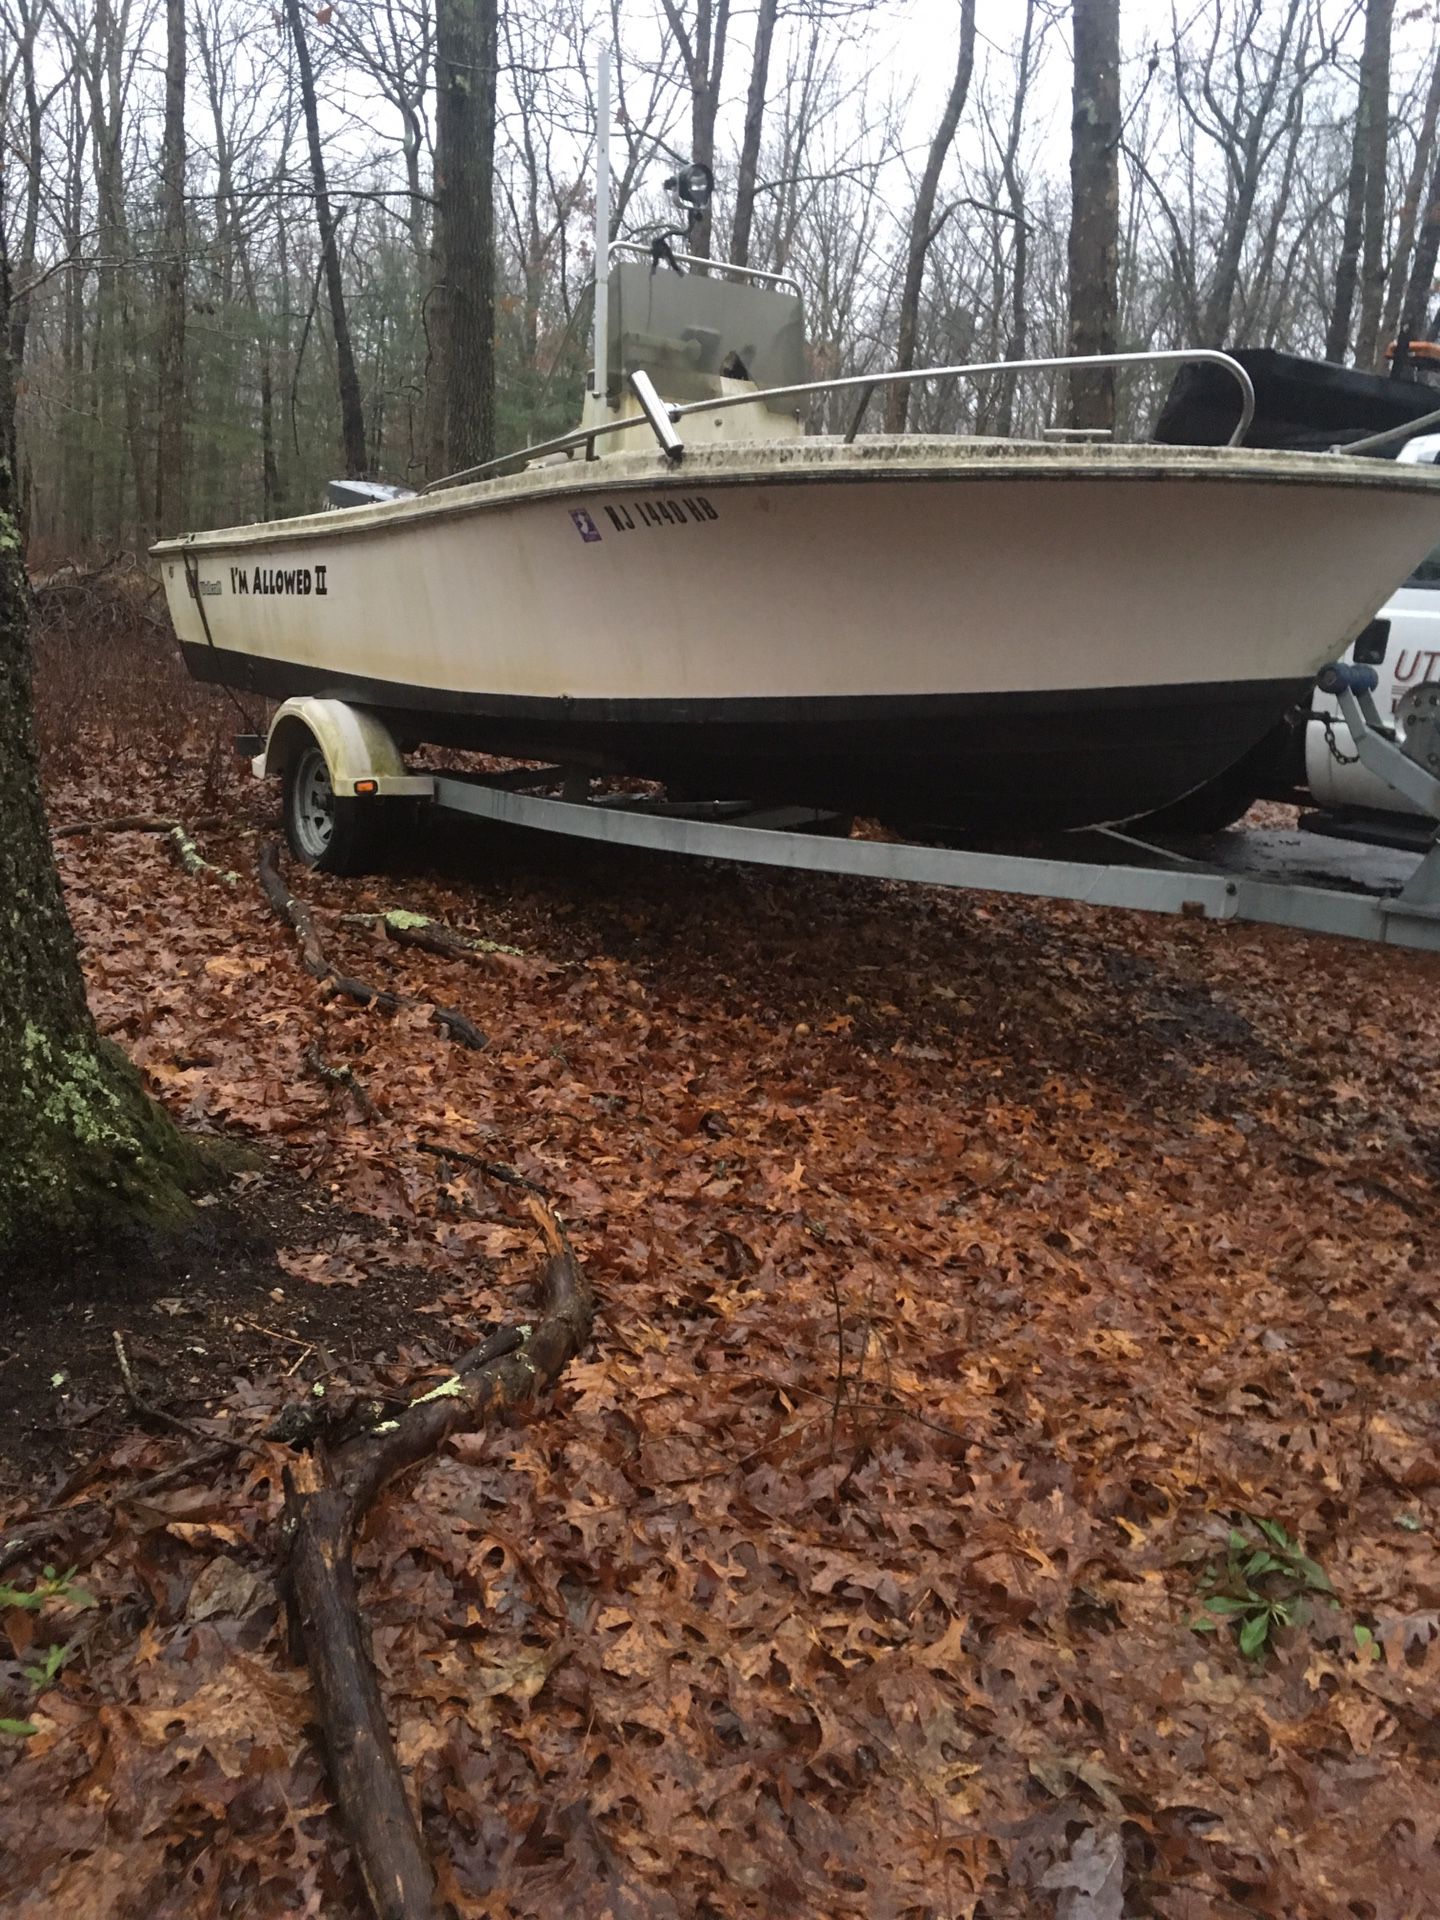 89 wellcraft 19’ center console boat